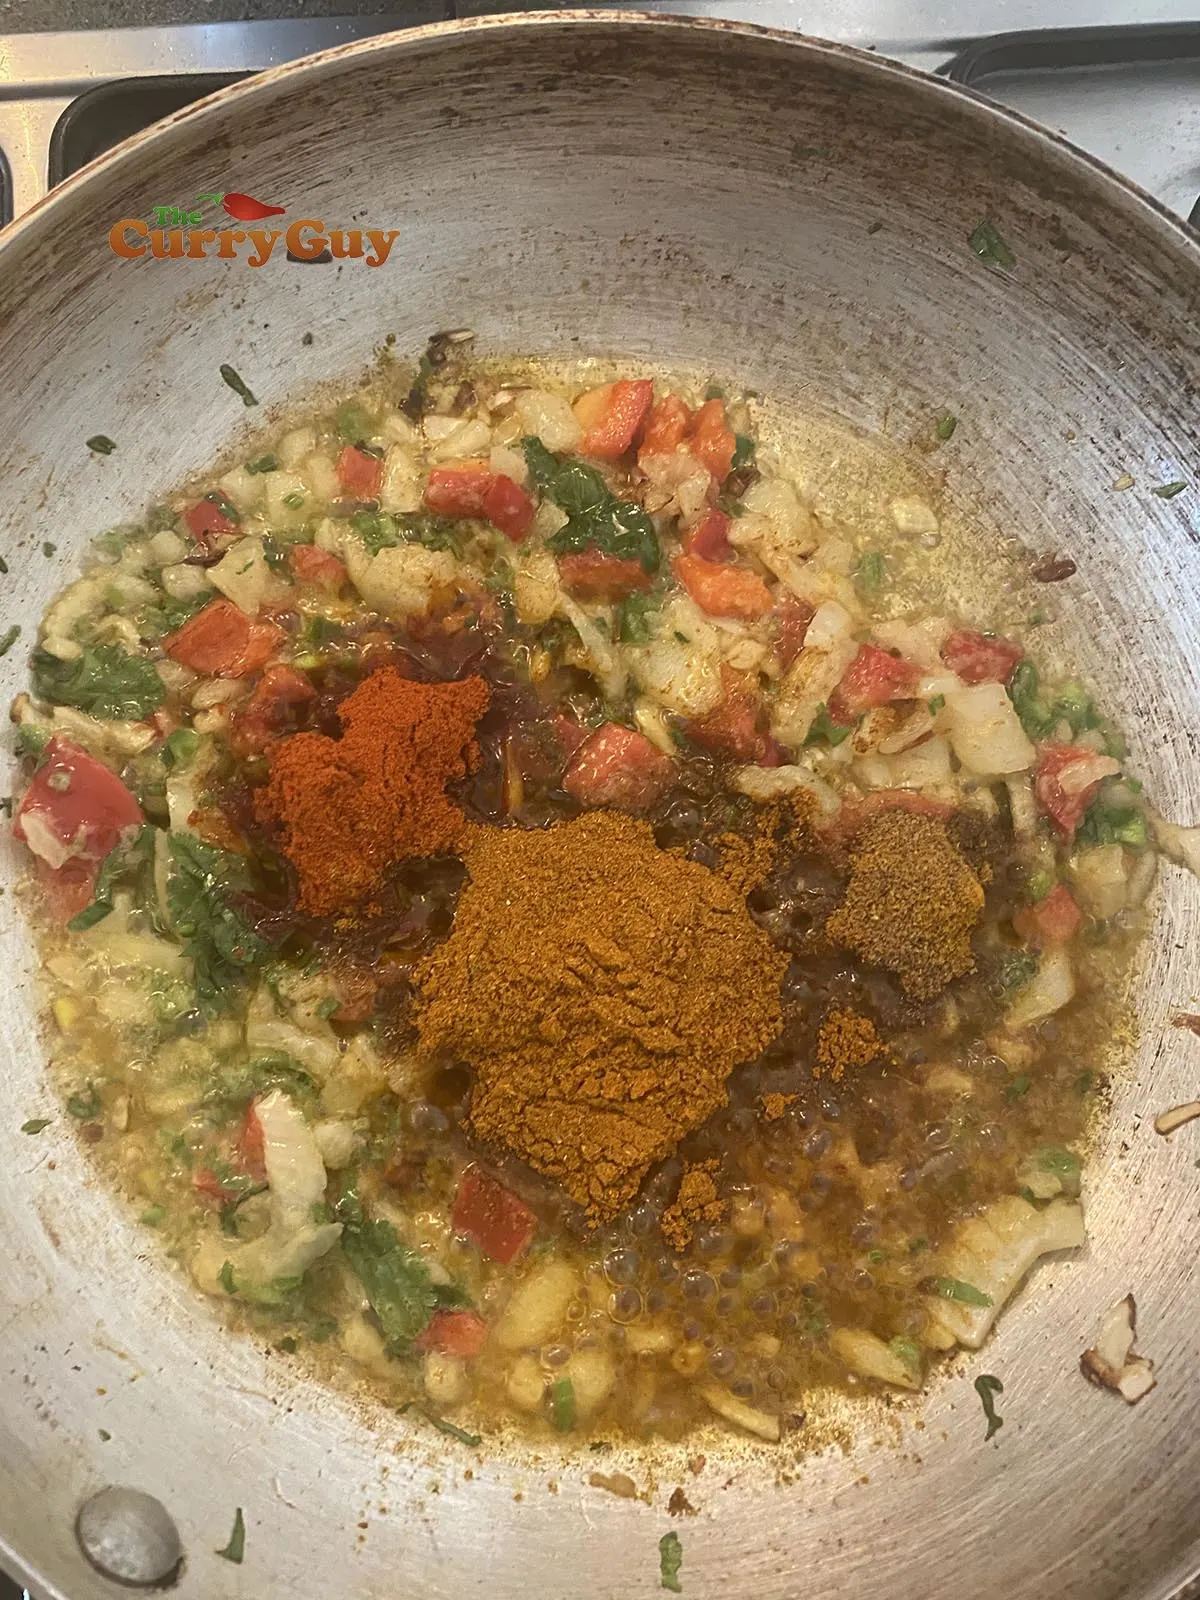 Adding ground spices to the pan